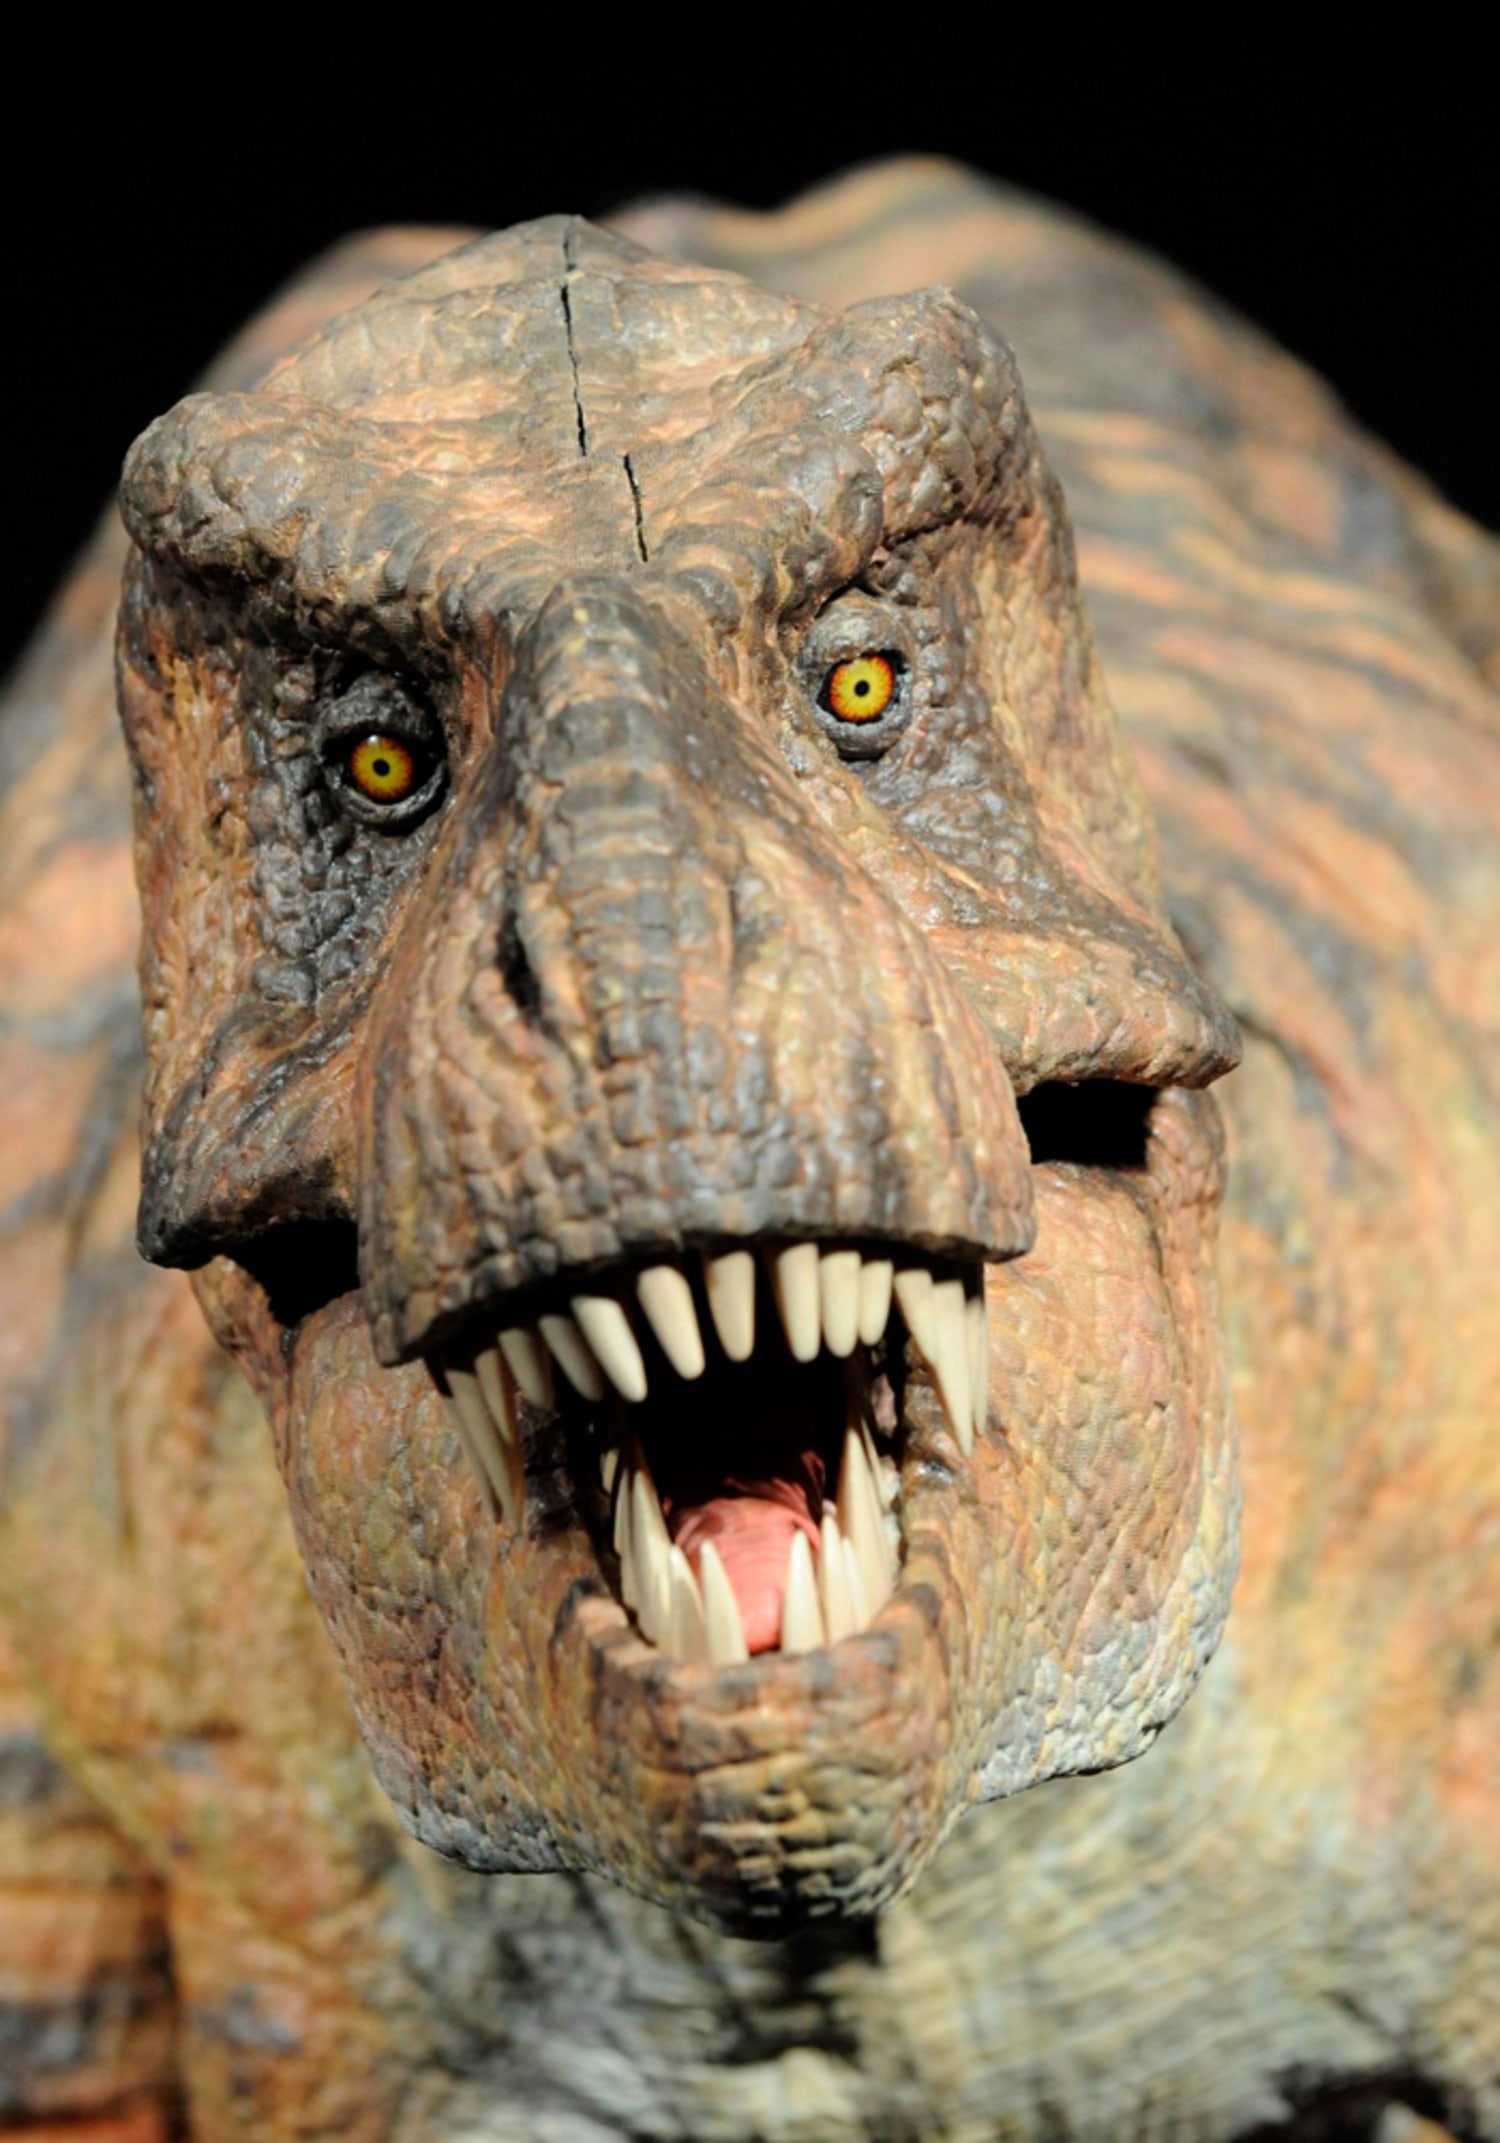 T. rex noses out dinosaur competition